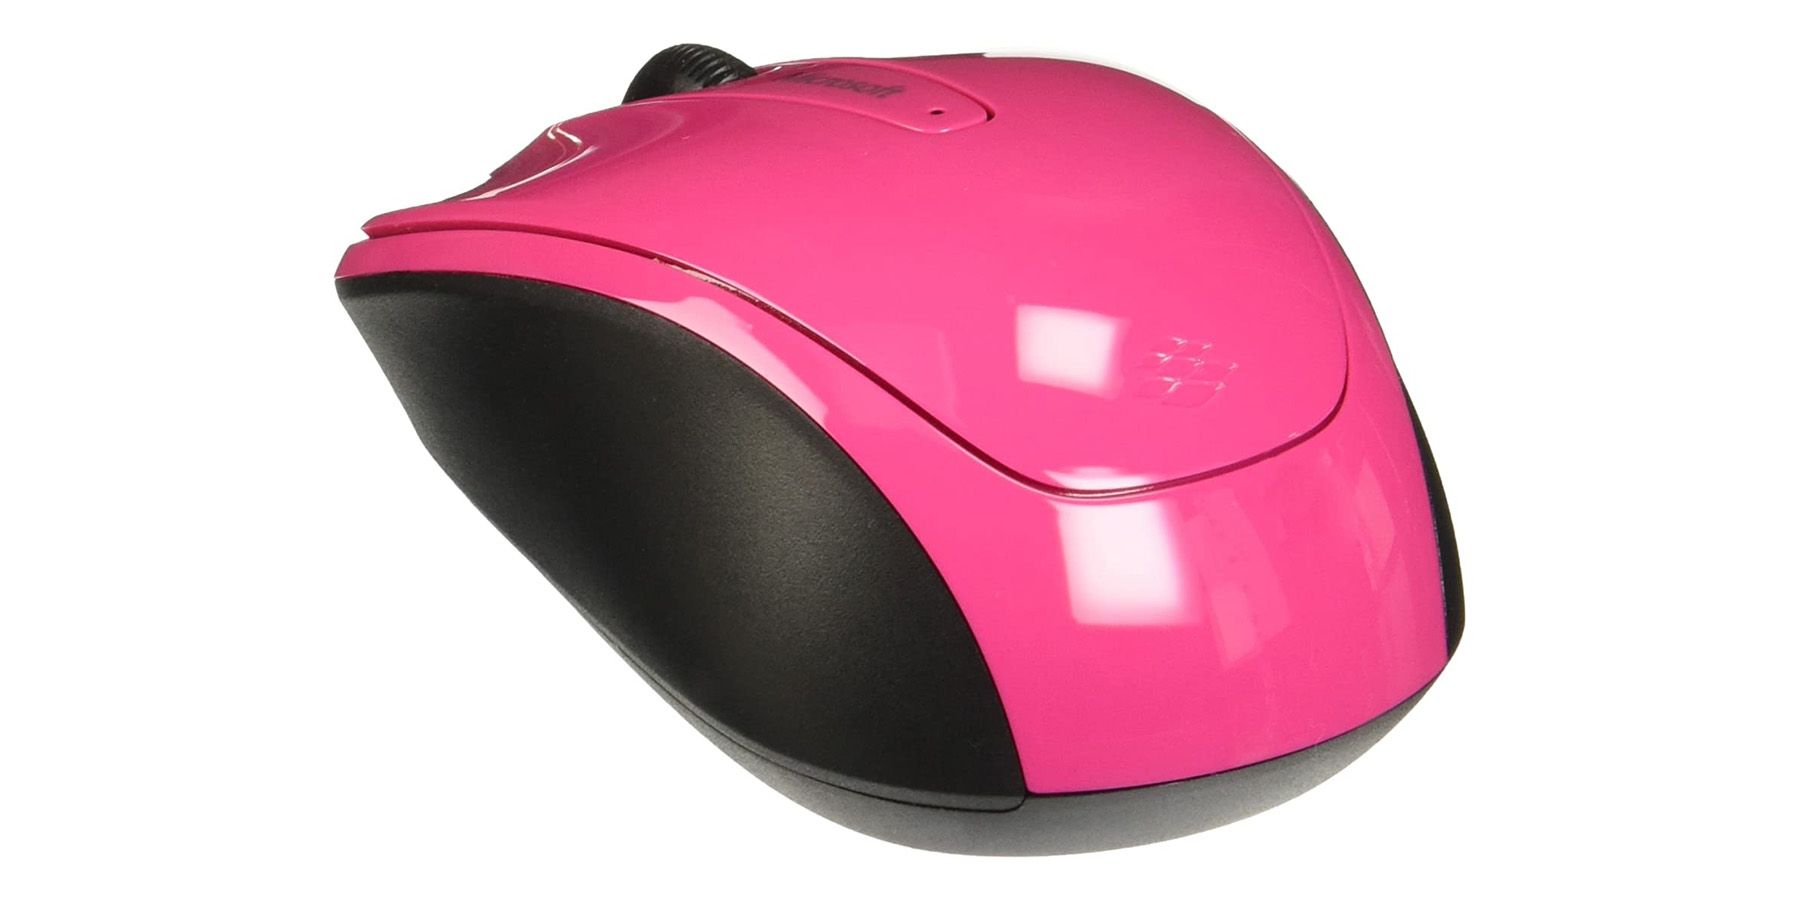 Microsoft 3500 Wireless Mobile Mouse